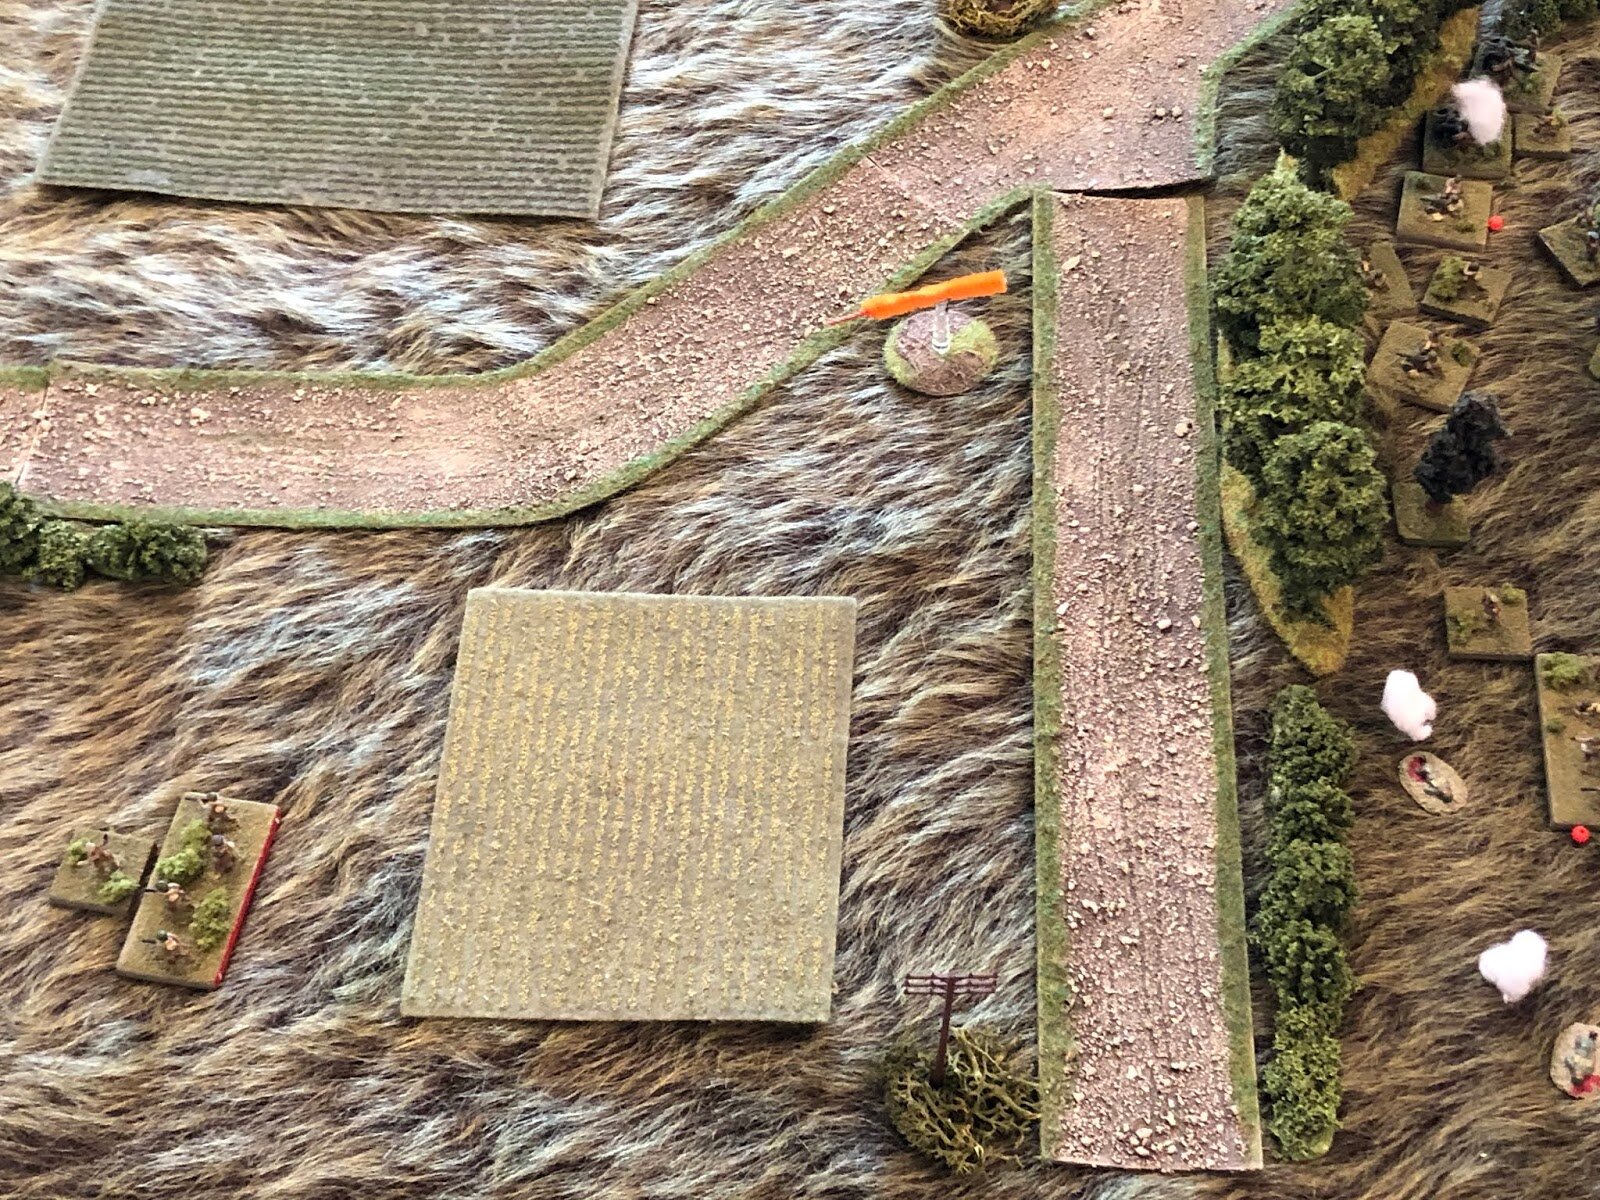  With 80mm, 76mm, 50mm, and 7.62mm rounds crisscrossing above their heads, the Soviet 1st Platoon Commander continues pushing his 1st Squad forward (bottom left). 